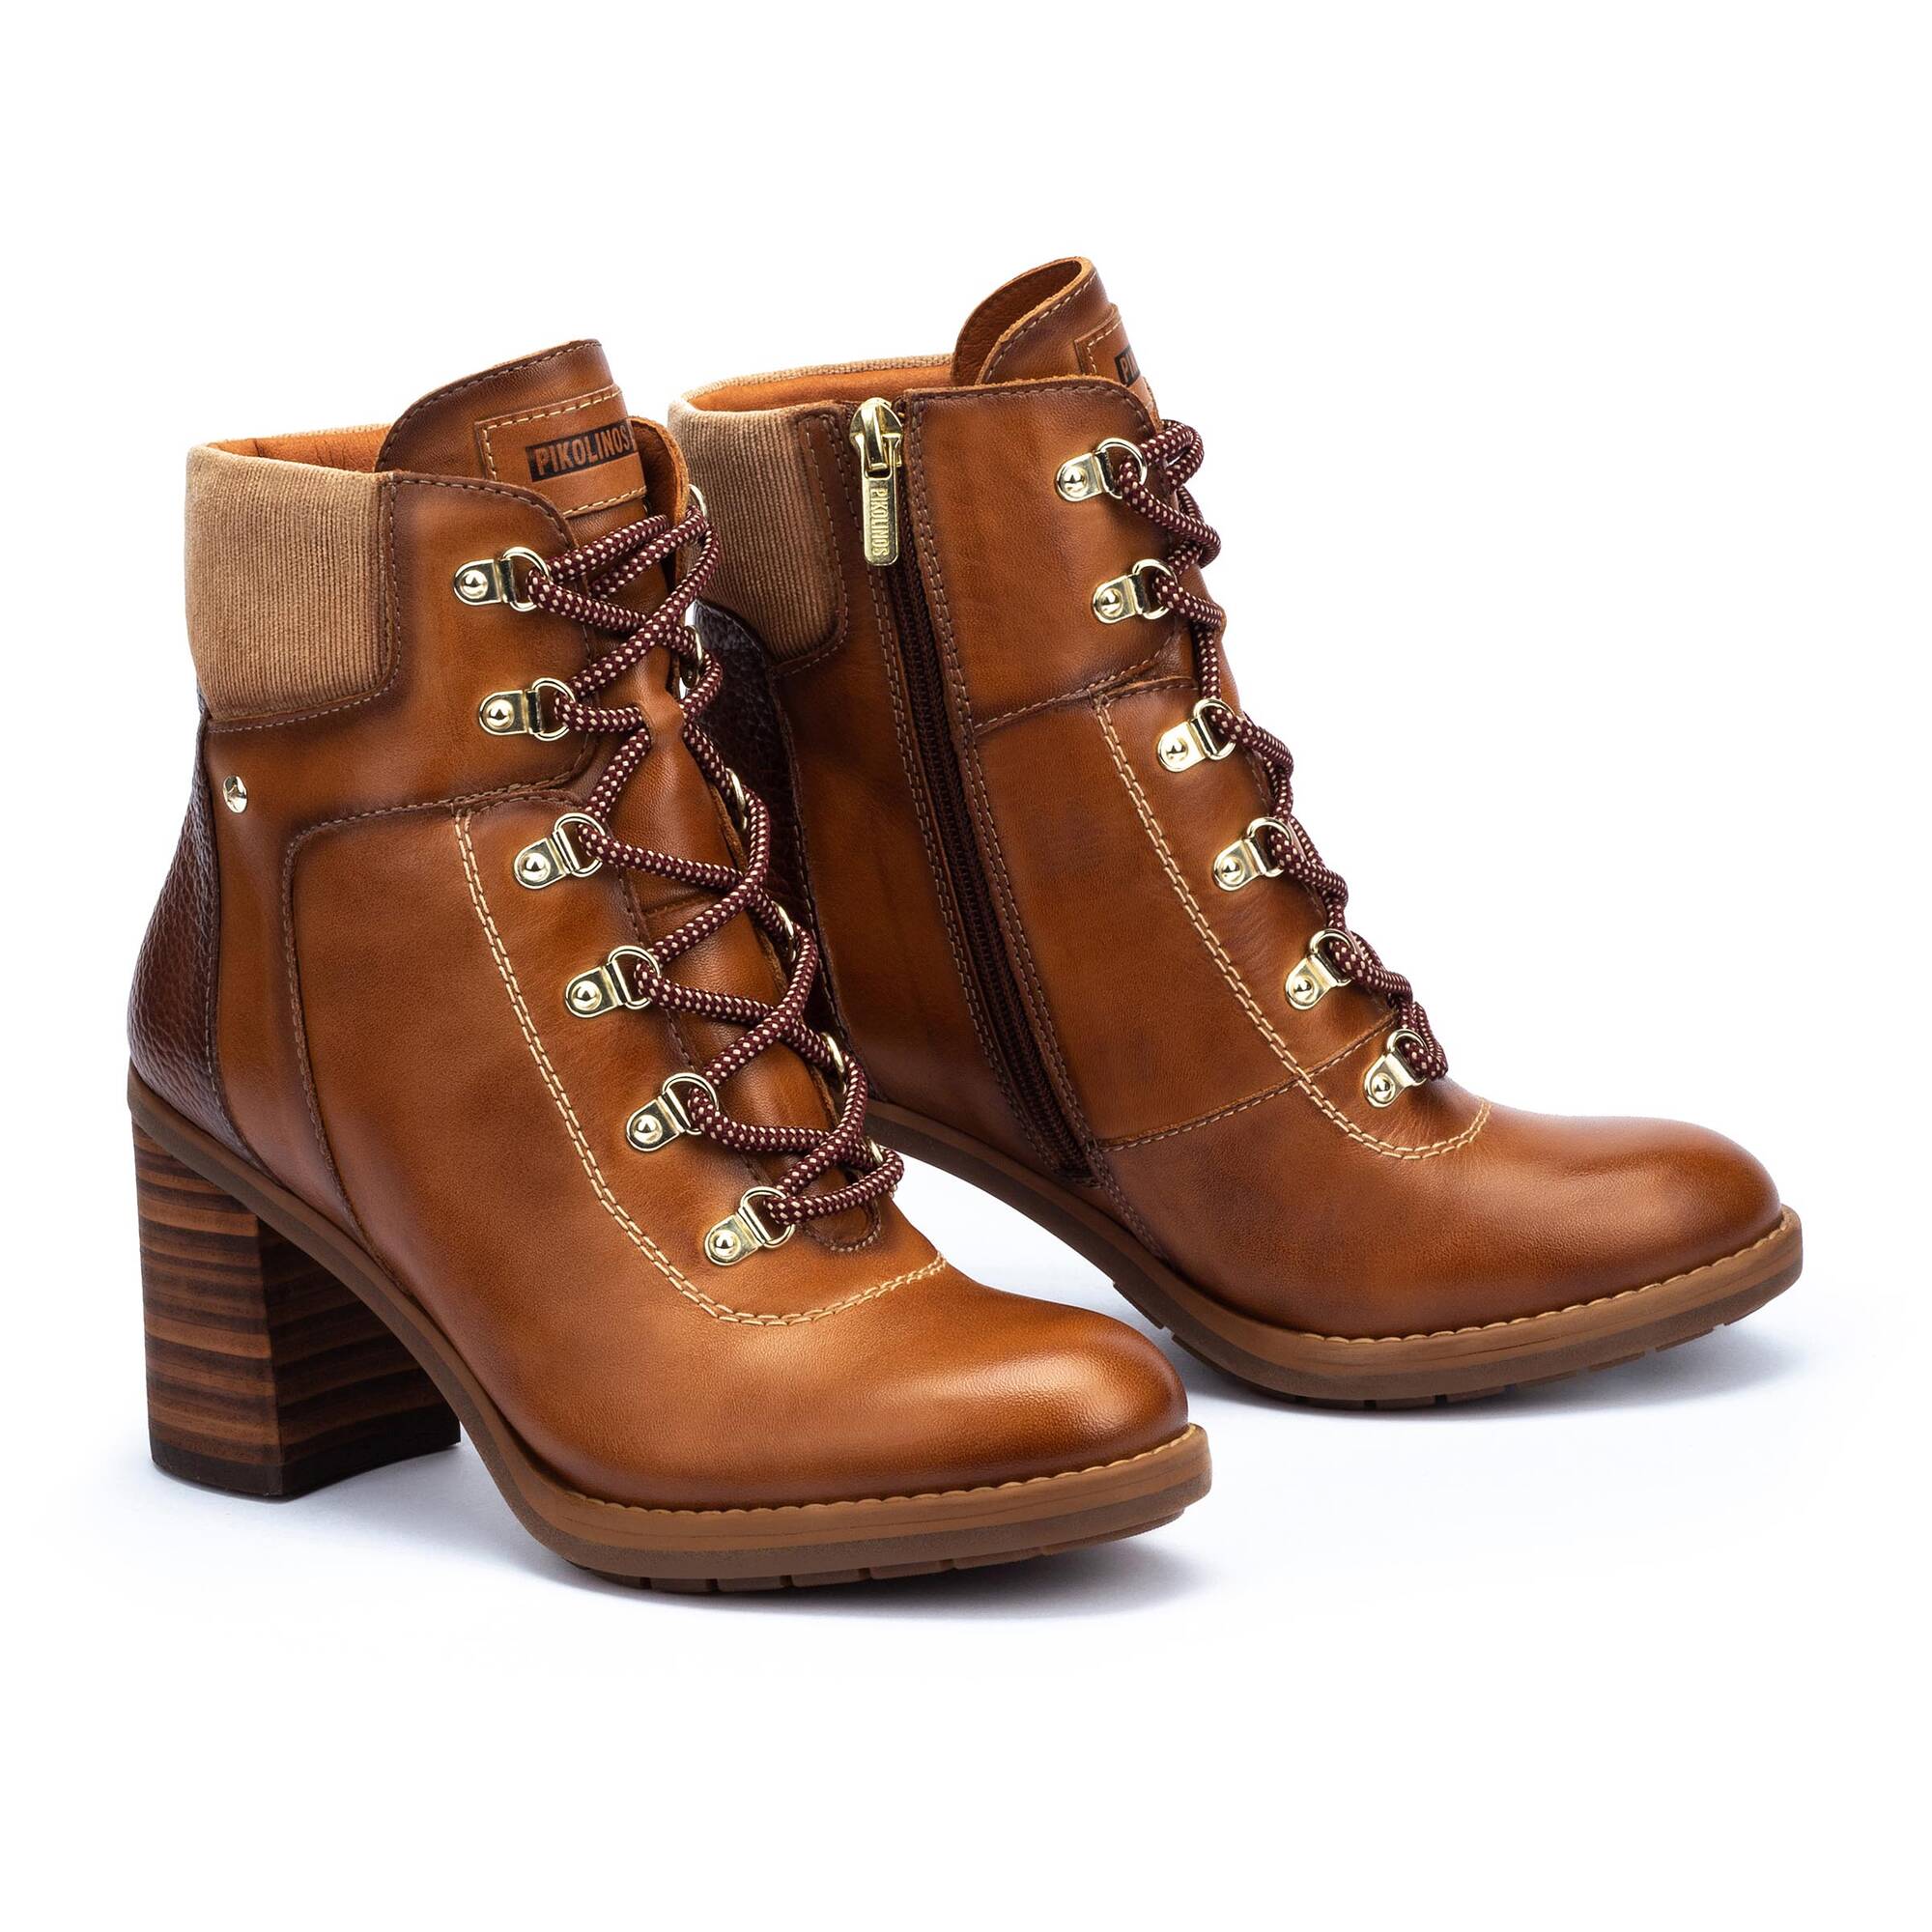 Women’s heeled ankle boots W7S-8851 | Pikolinos Online Shop